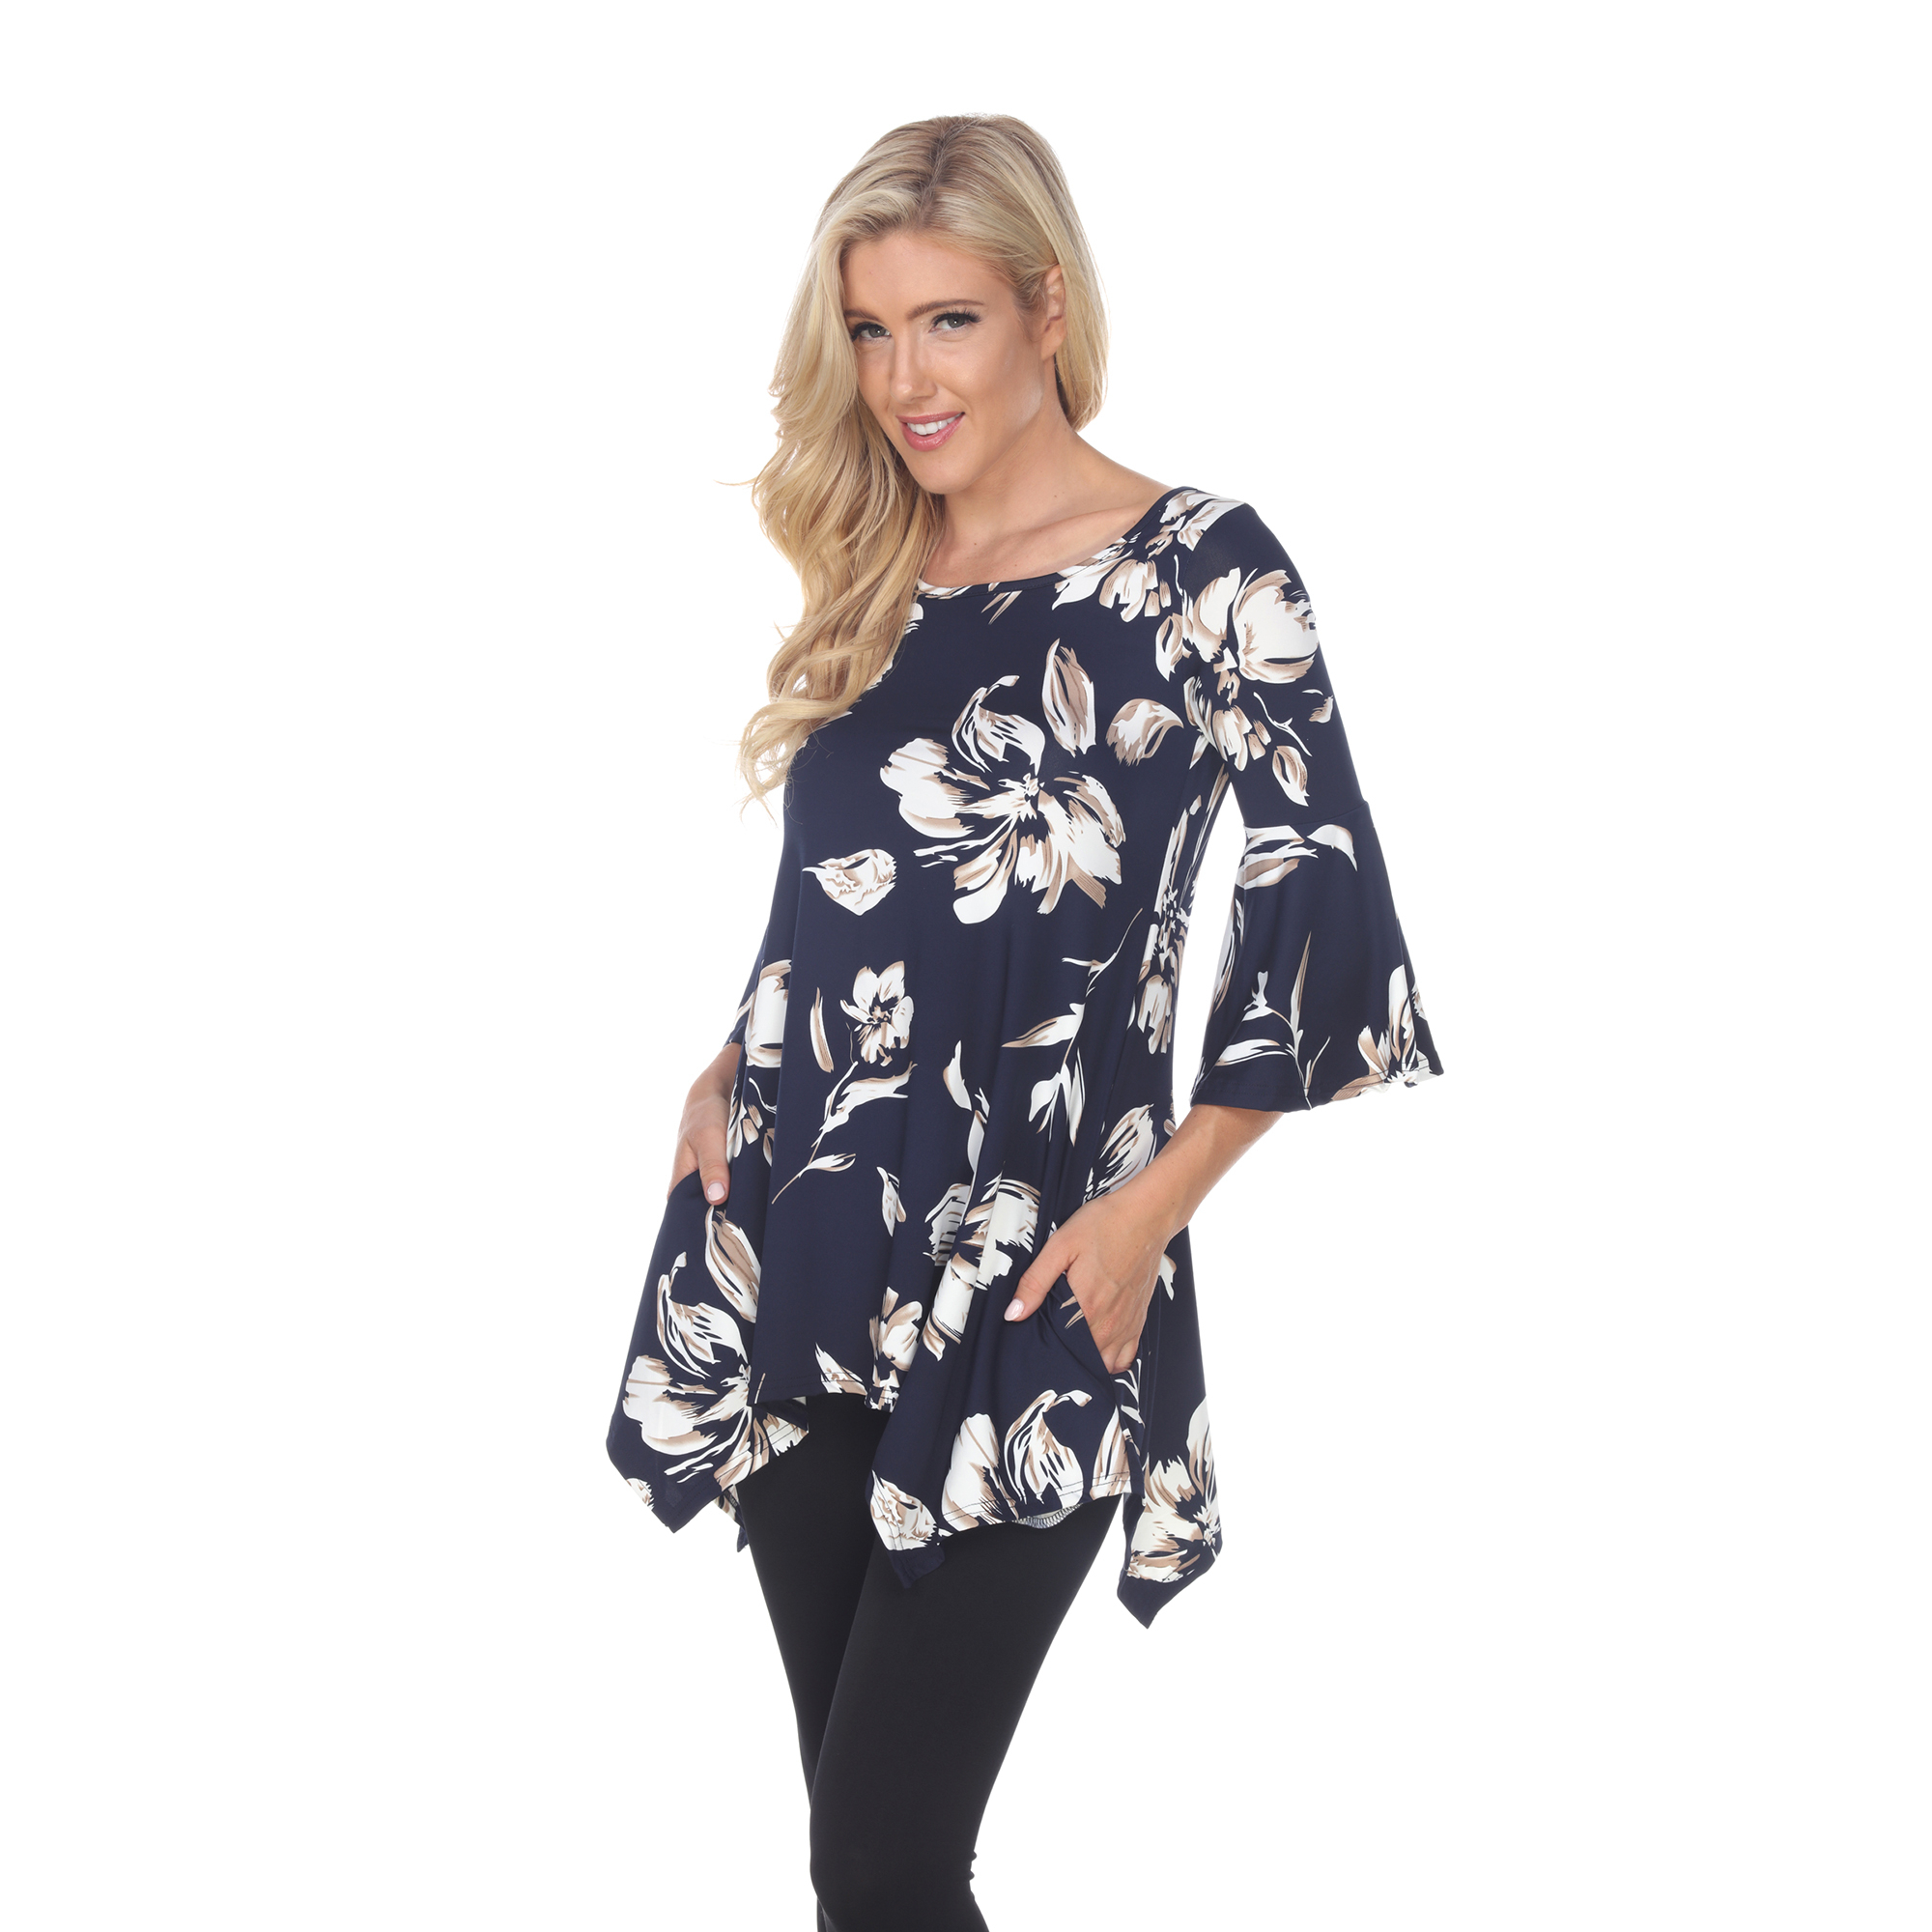 White Mark Women's Floral Print Quarter Sleeve Tunic Top With Pockets - Black, 4X